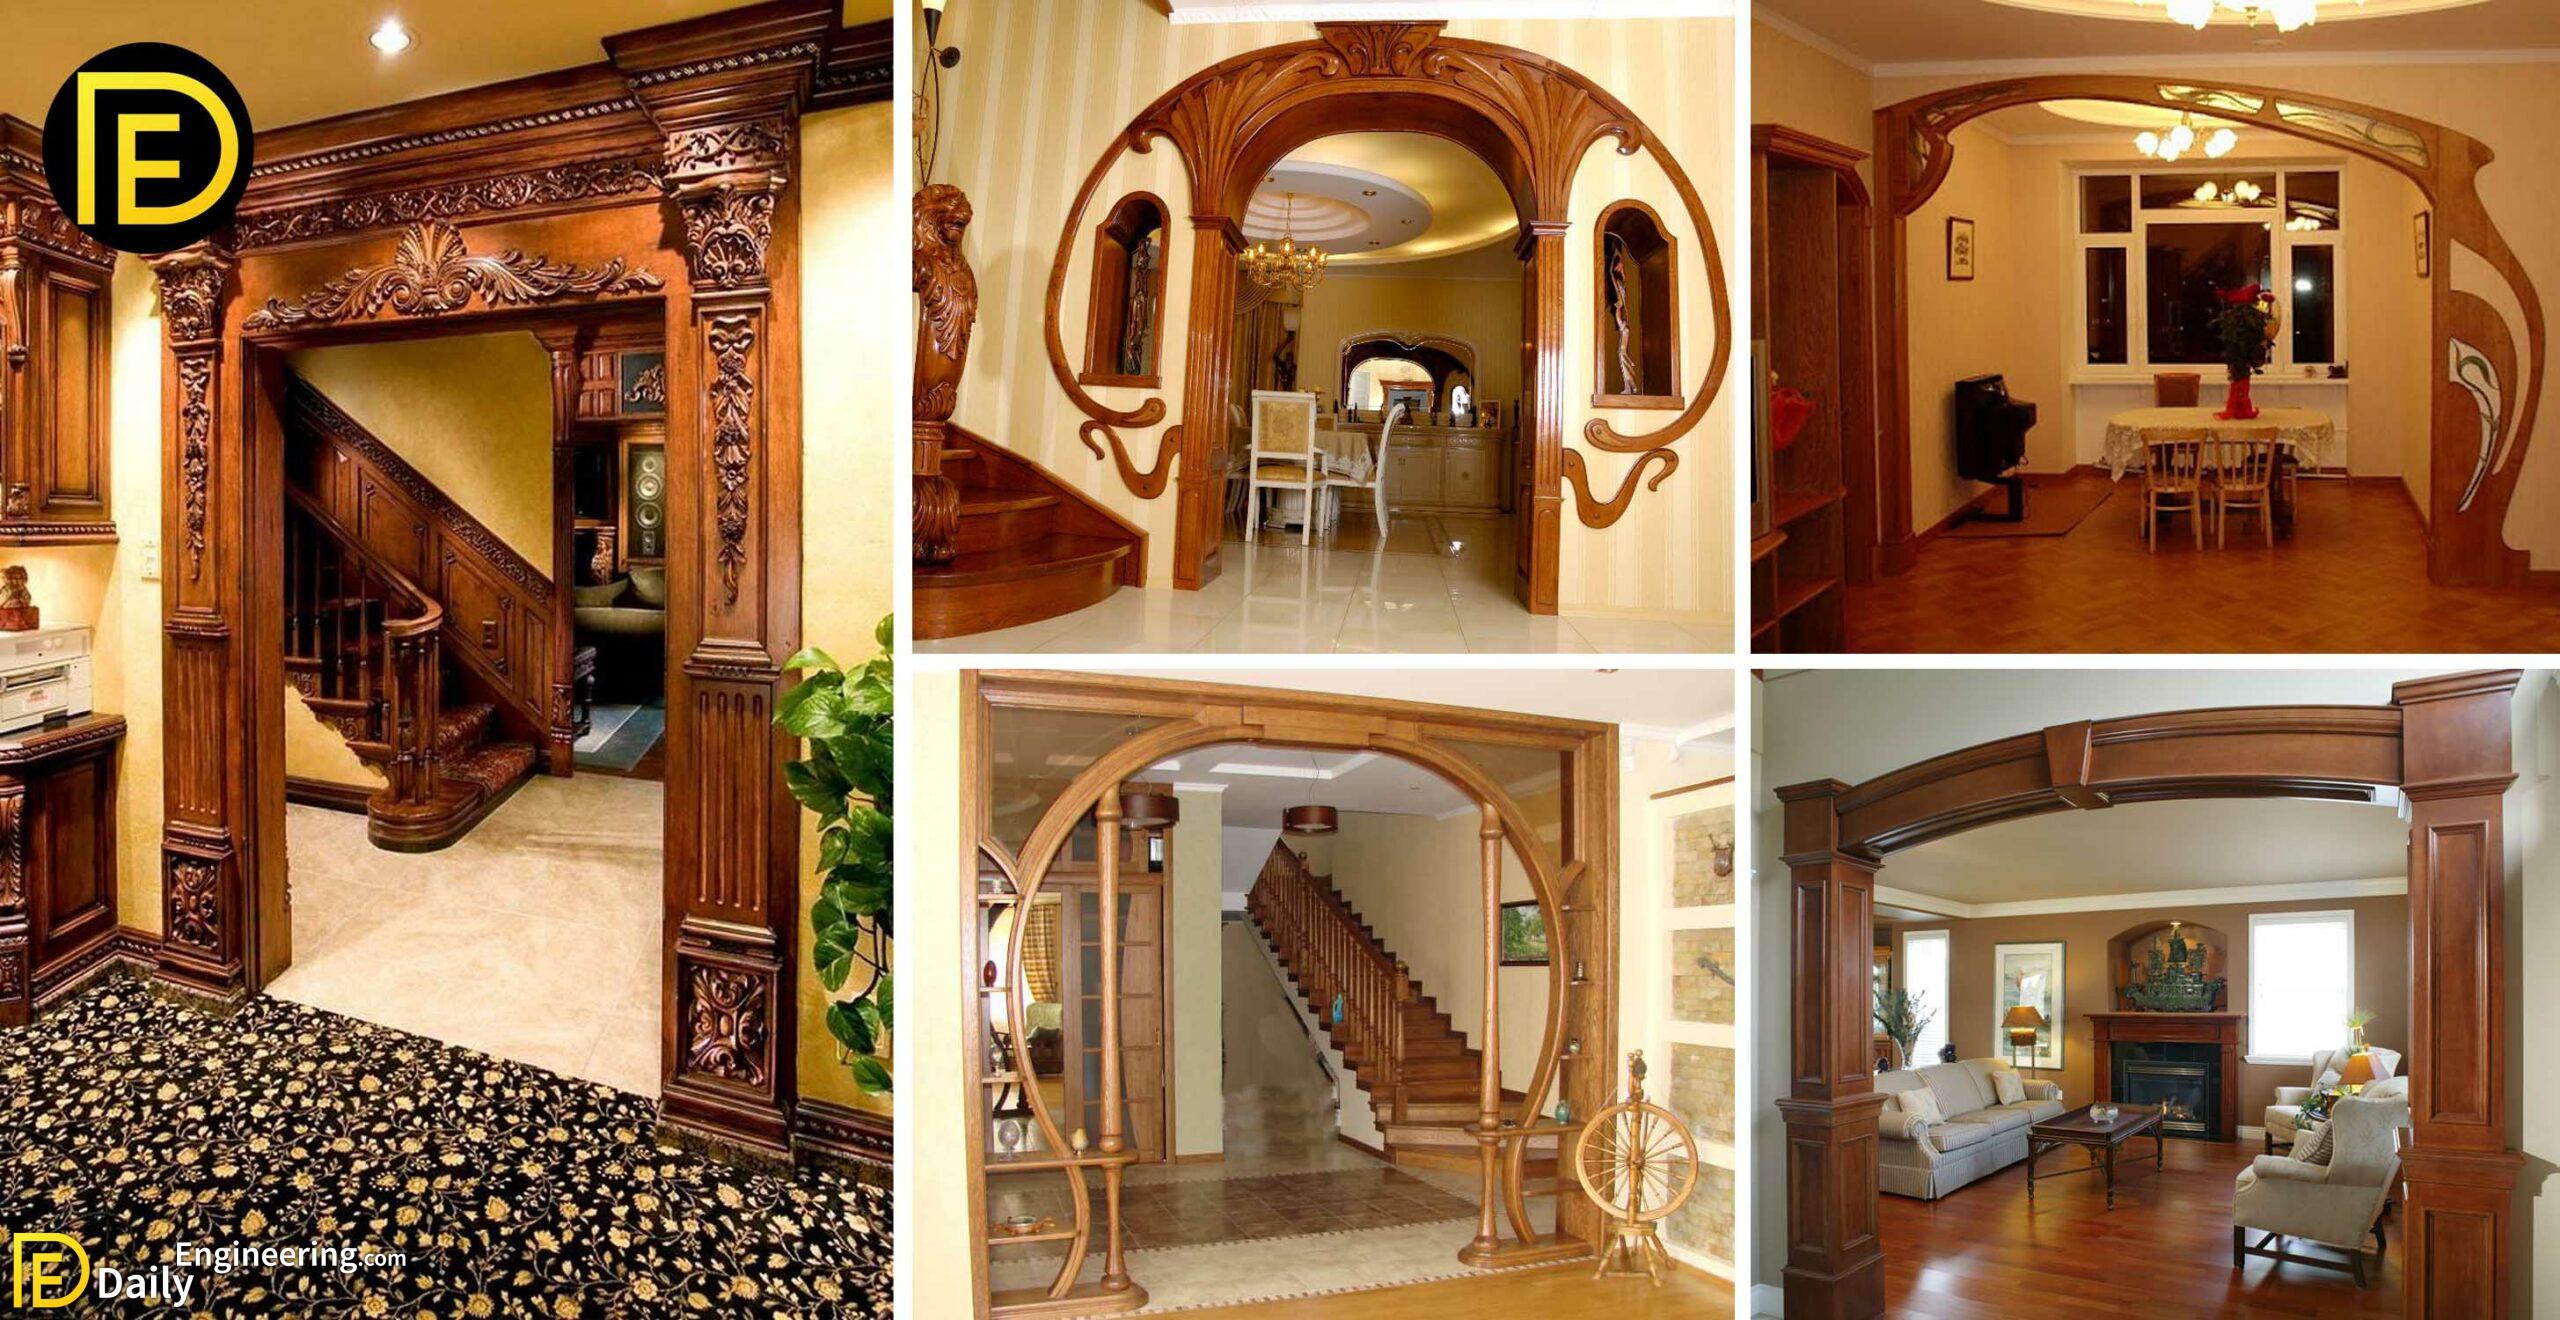 Top 30 Ideas To Decorate With Wooden Arches Your House - Daily Engineering